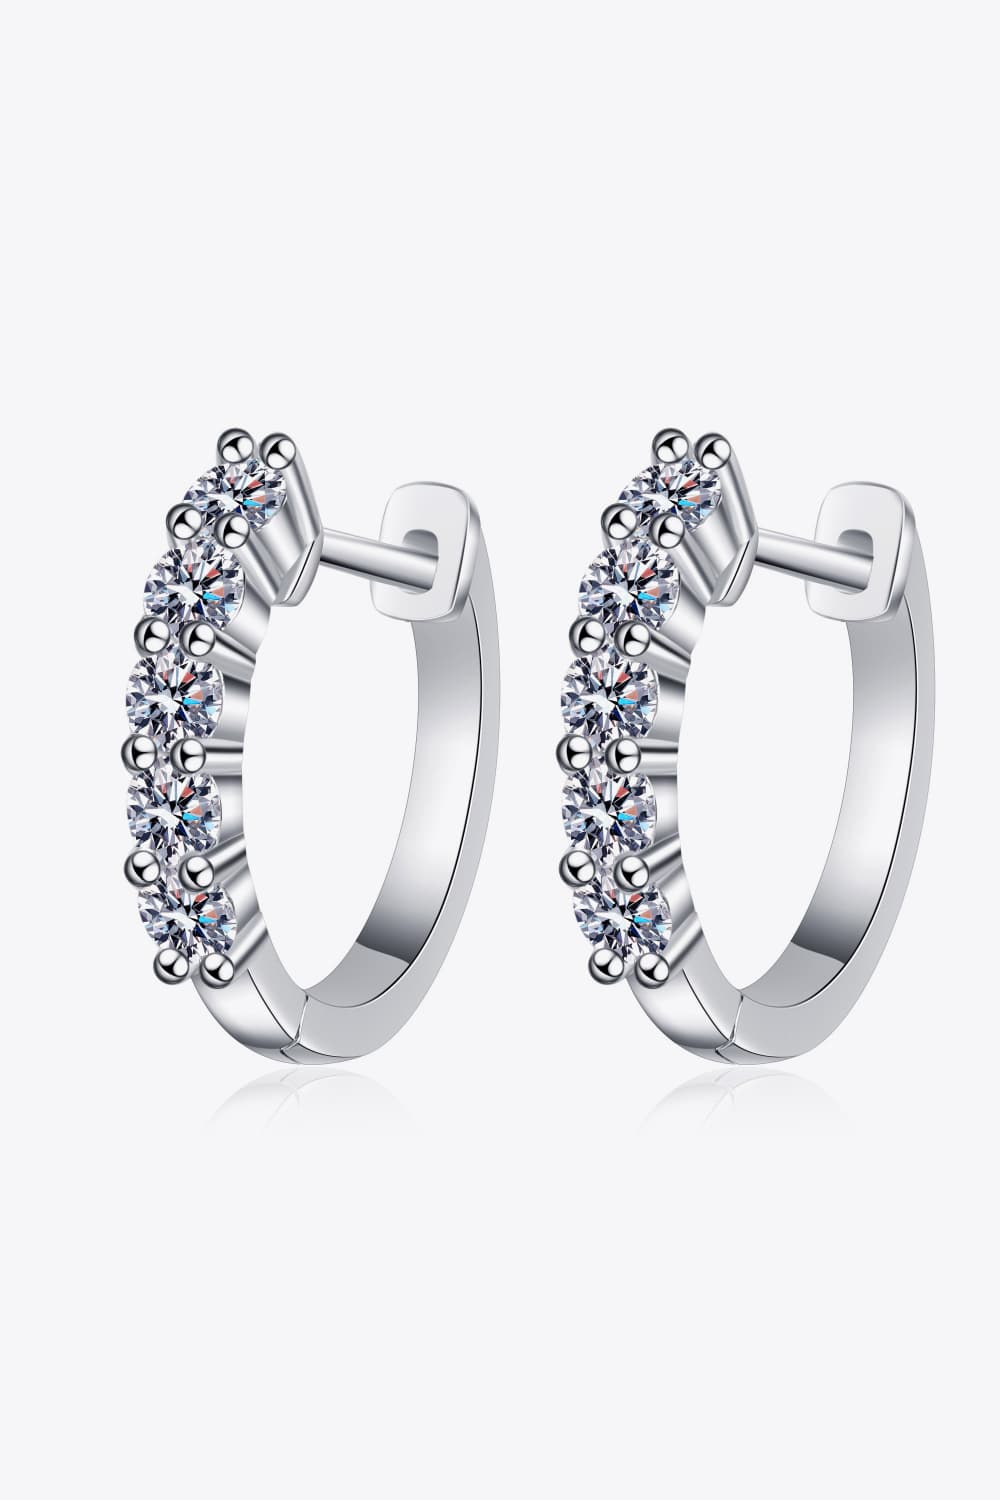 1 Carat Moissanite Hoop Earrings free shipping -Oh Em Gee Boutique